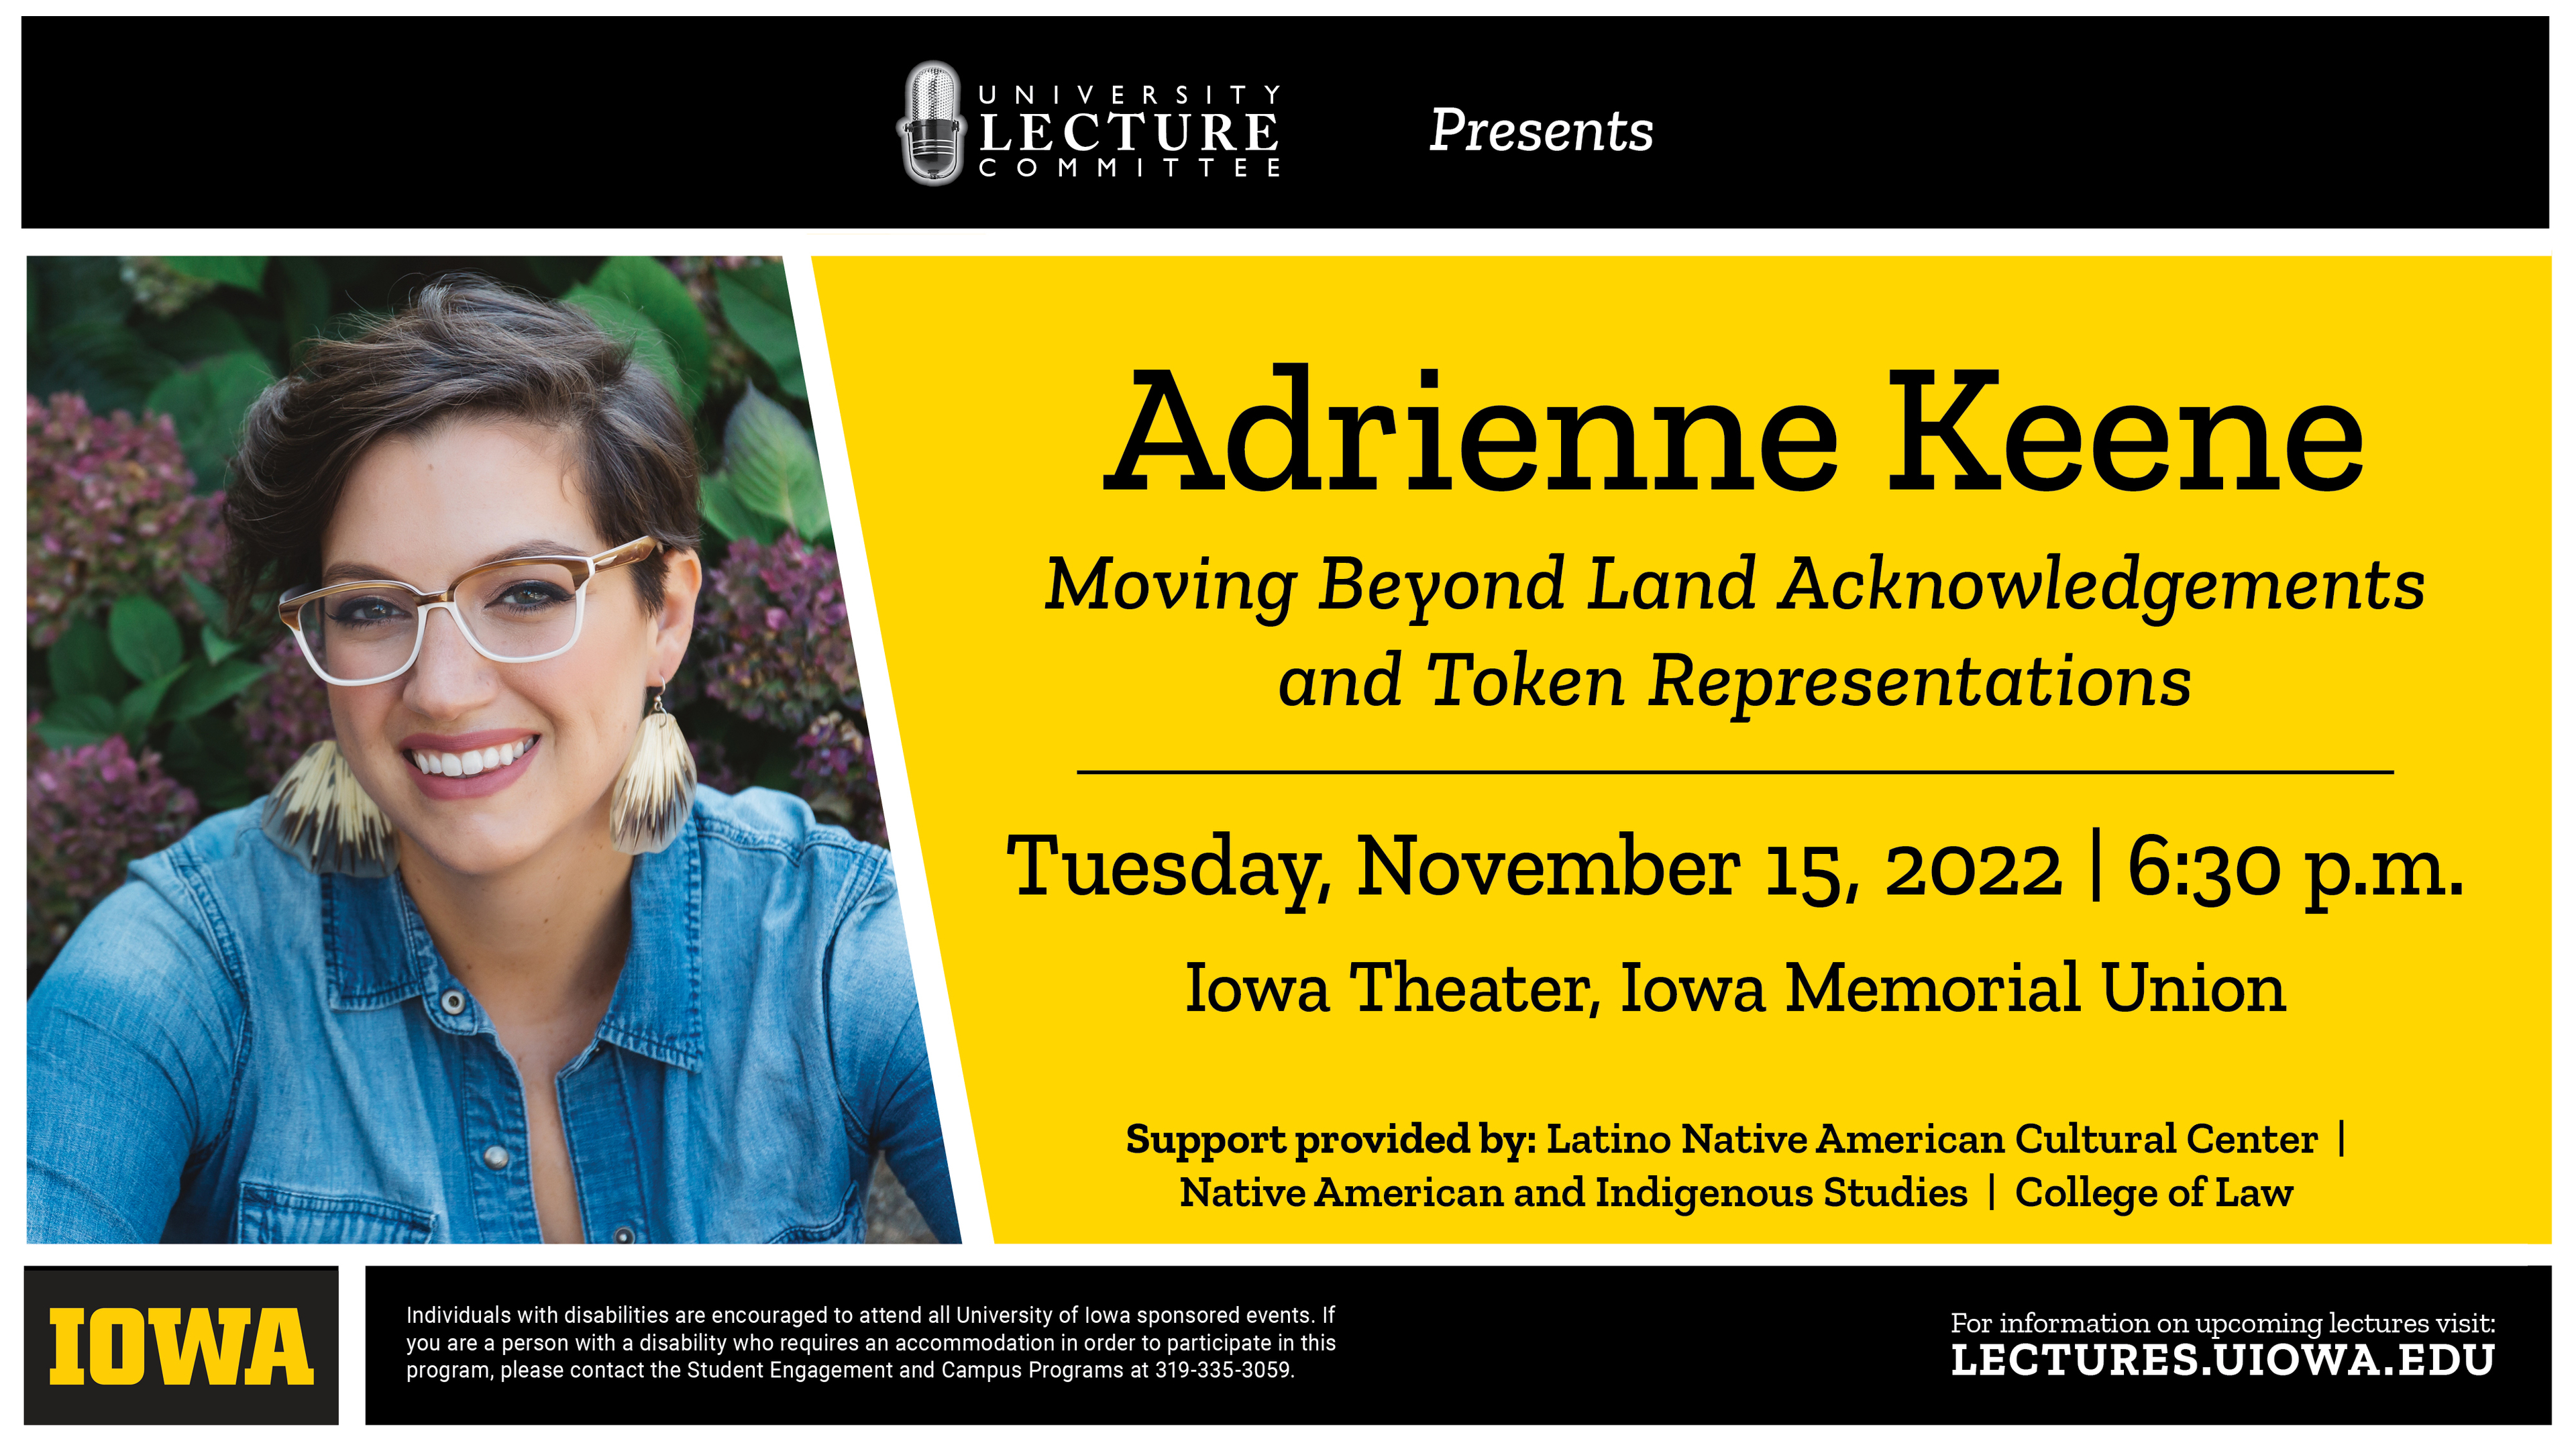 Adrienne Keene Moving Beyond Land Acknowledgements and Token Representations Tuesday, November 15th, 2022 at 6:30pm in the Iowa Theater at the IMU